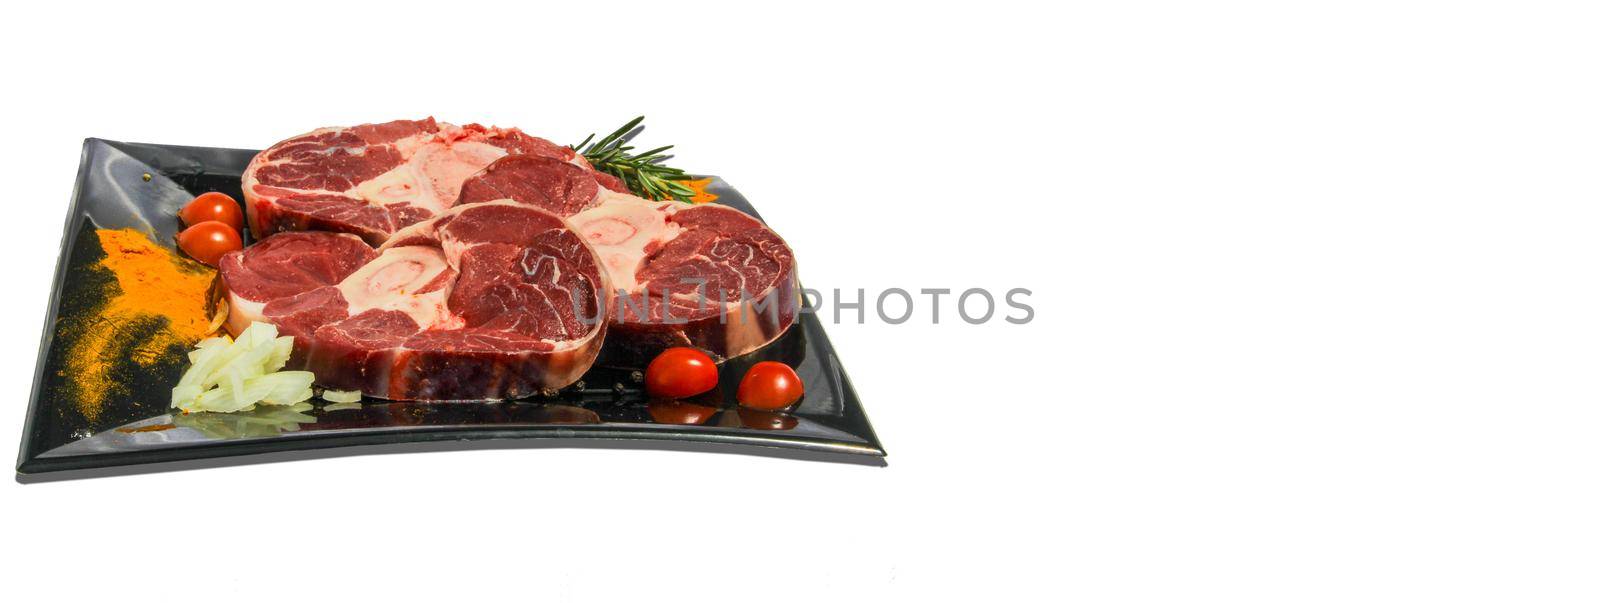 Raw meat dish white background 5 by pippocarlot